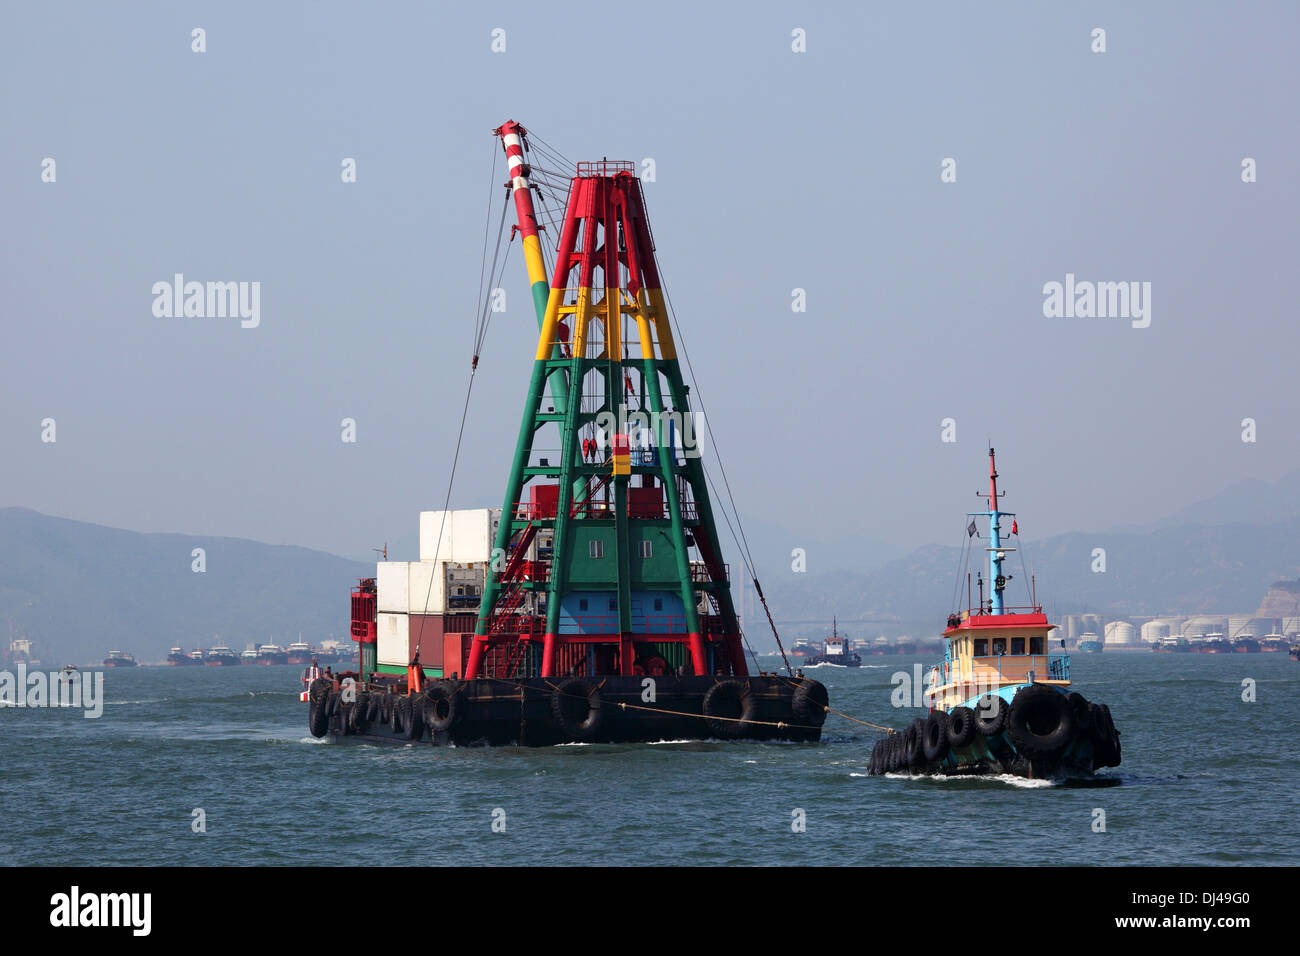 Tugboat with a crane barge in the harbour of Hong Kong Stock Photo